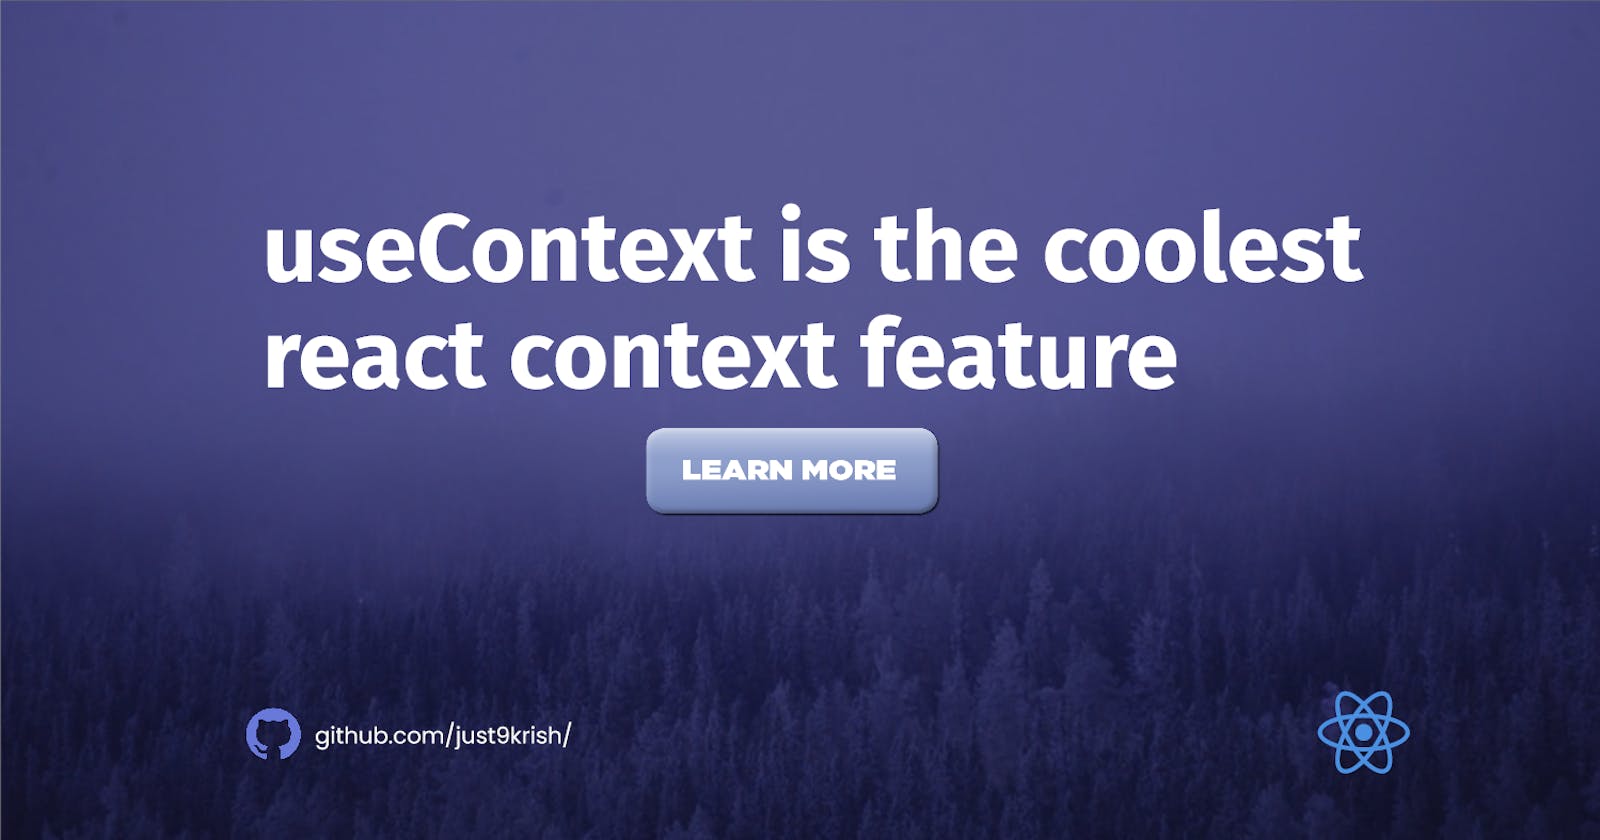 useContext is the coolest react context feature